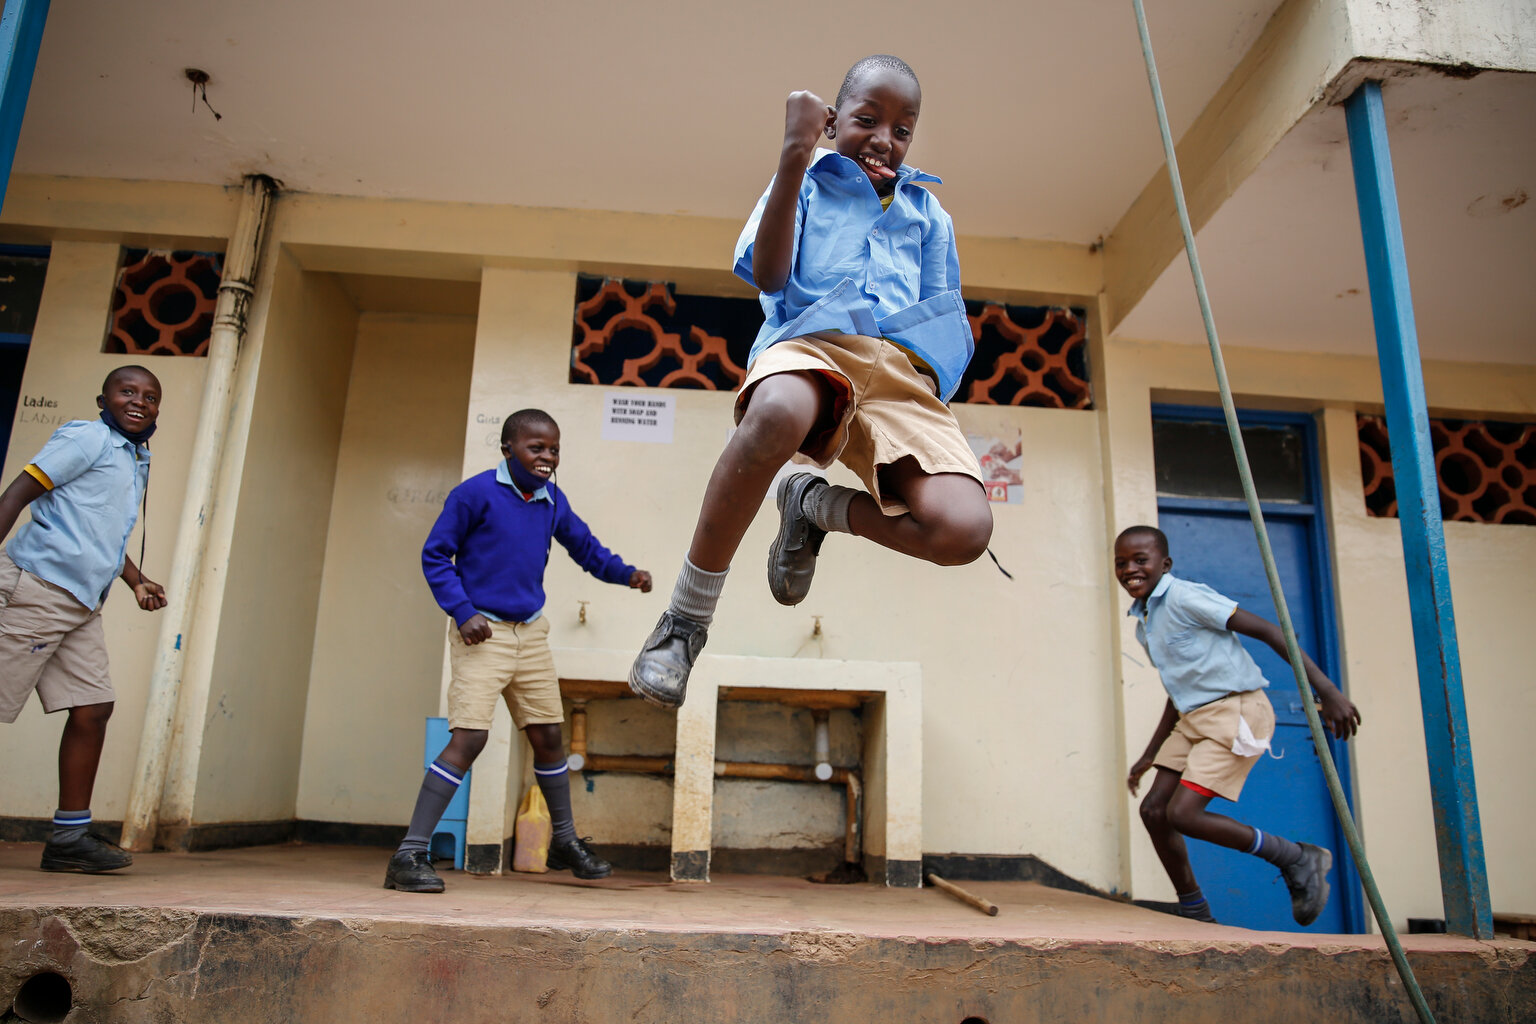  Schoolchildren joke around and play at the Olympic Primary School in Kibera, one of the capital Nairobi's poorest areas, in Kenya Monday, Oct. 12, 2020. (AP Photo/Brian Inganga) 